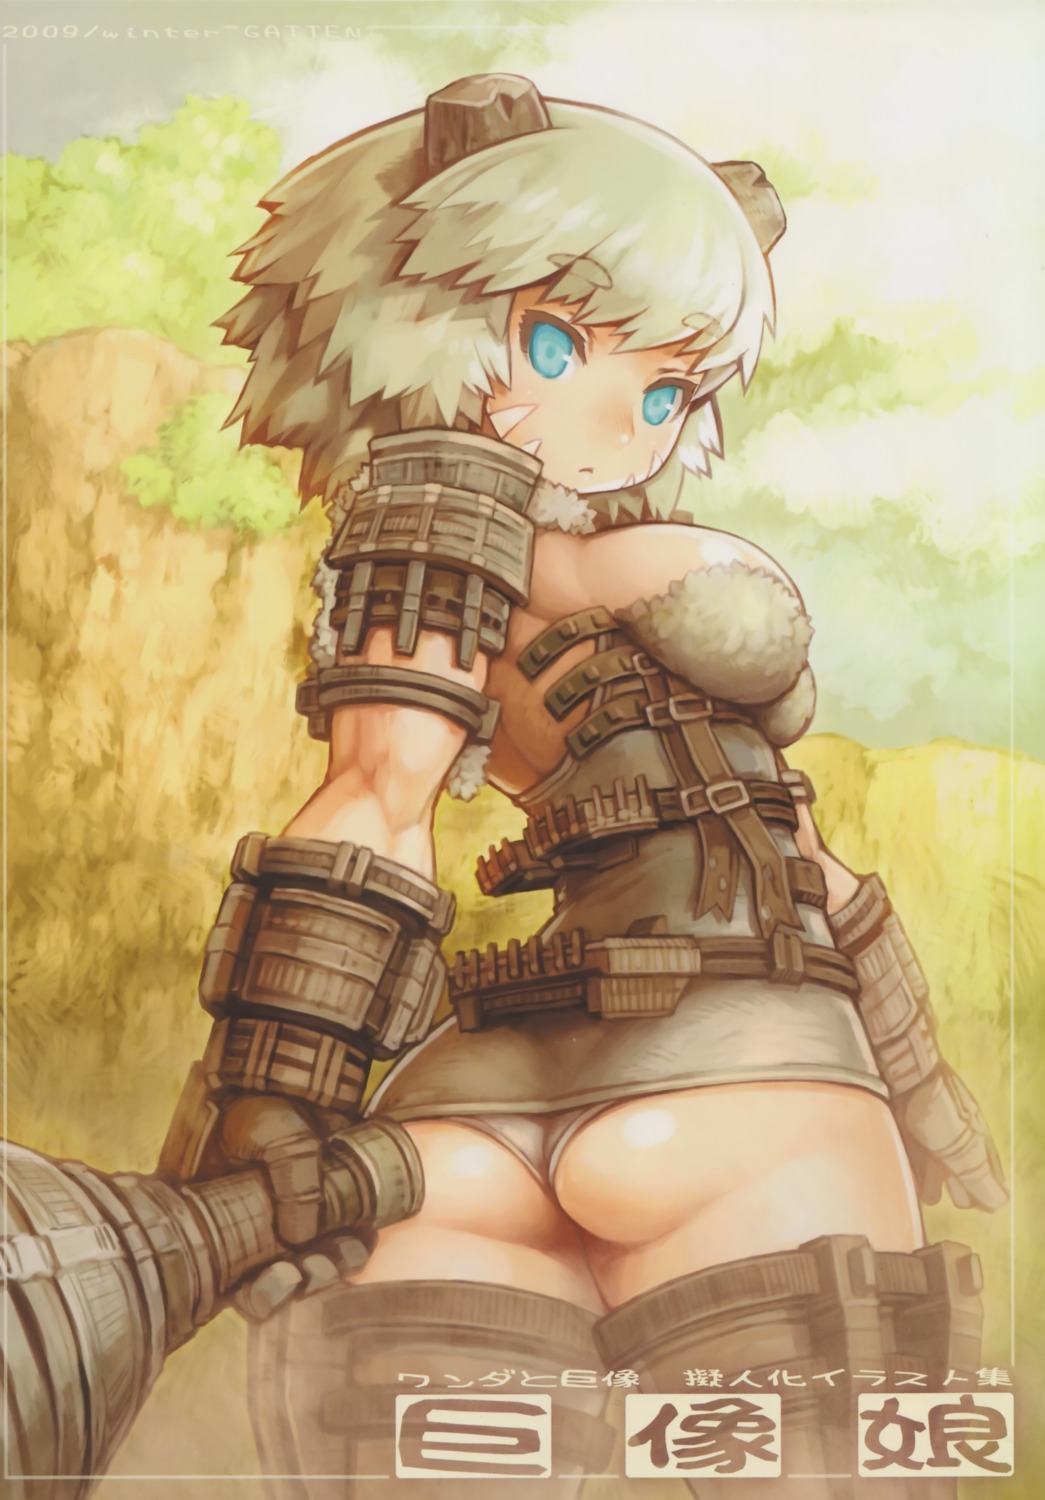 anthropomorphization ass gatten shadow_of_the_colossus shigatake thighhighs valus